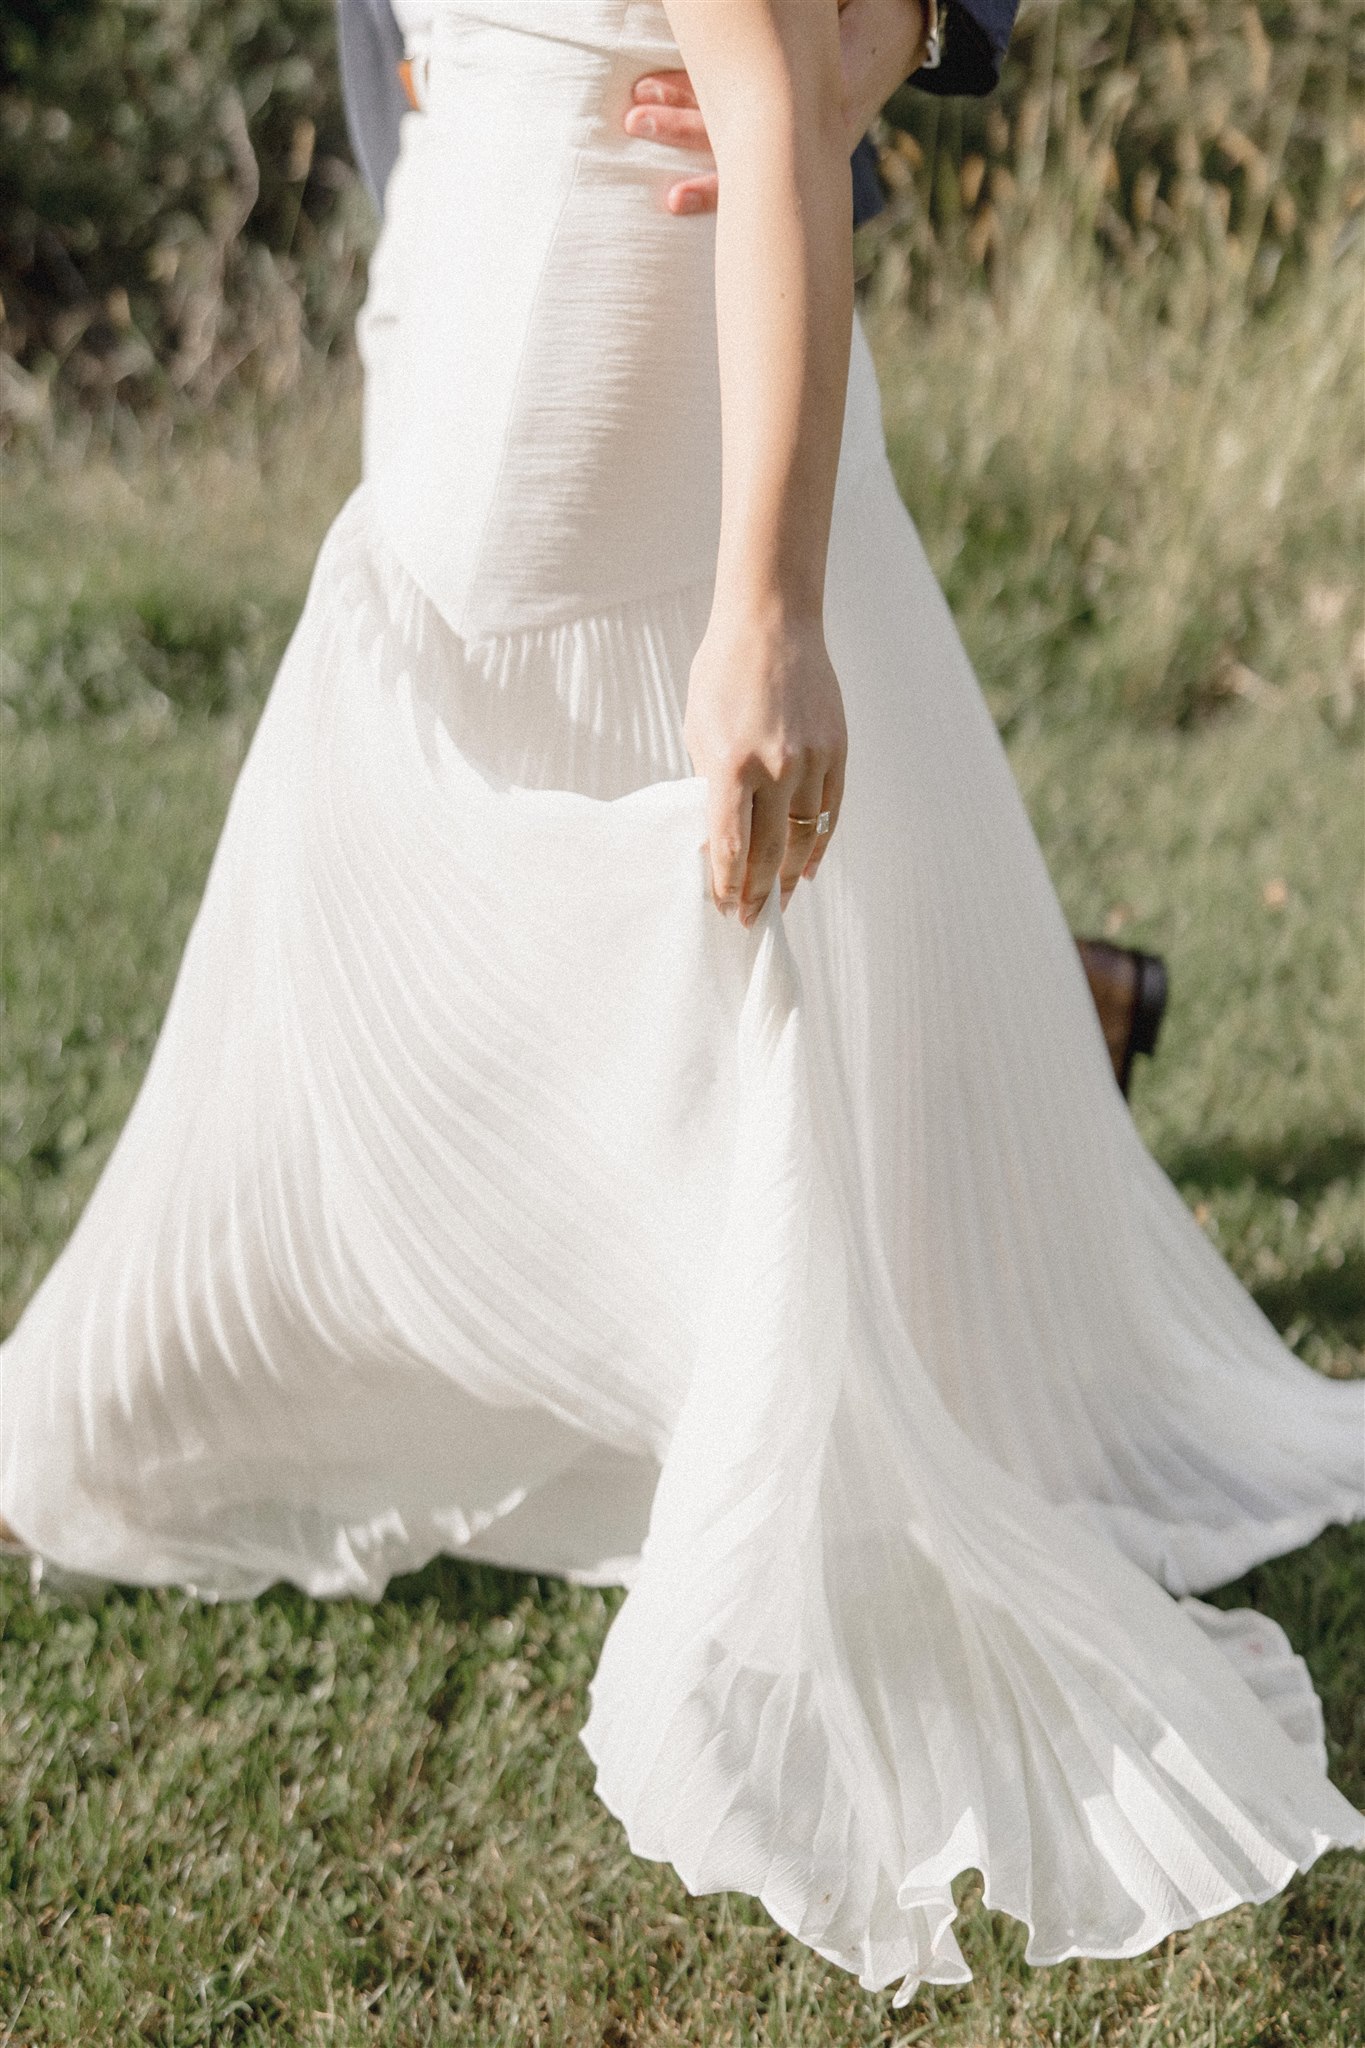 Bride showcases her dress with the striking green grass as a background